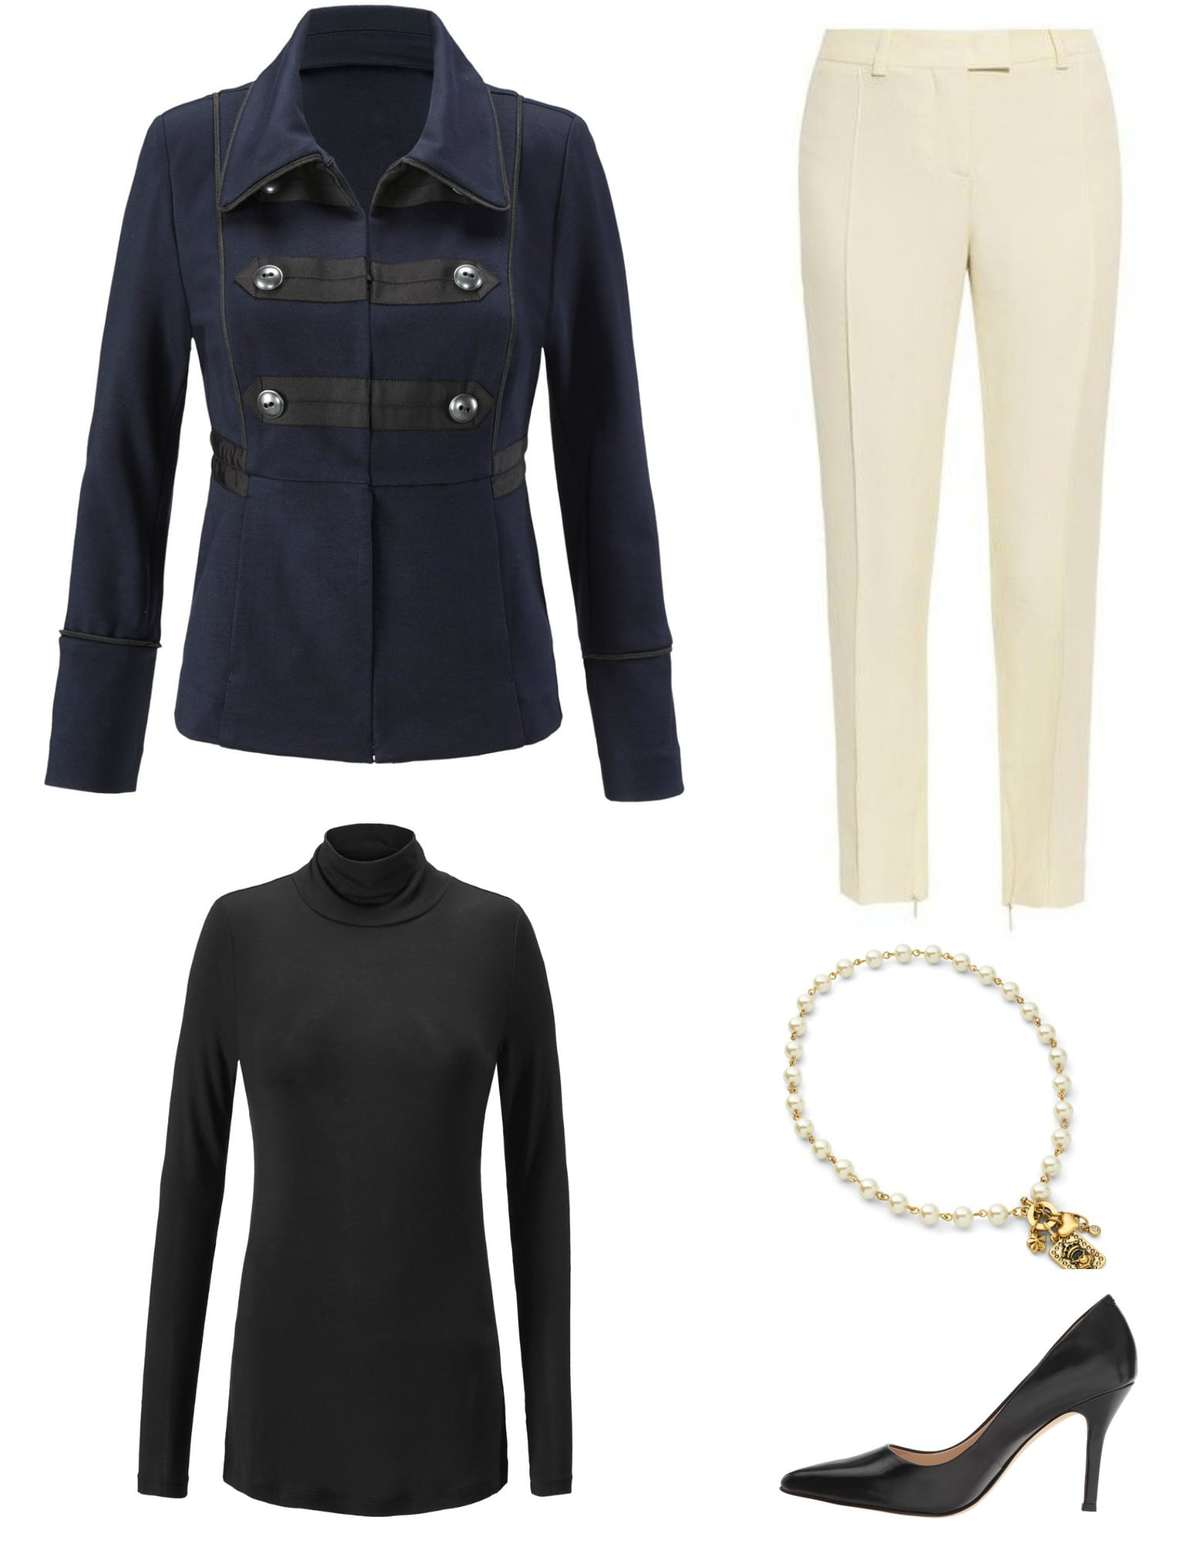 The cabi In The Band Jacket styled with the Layer Turtleneck, ivory ankle length pants, cabi Heritage necklace, and classic black pointed toe pumps.